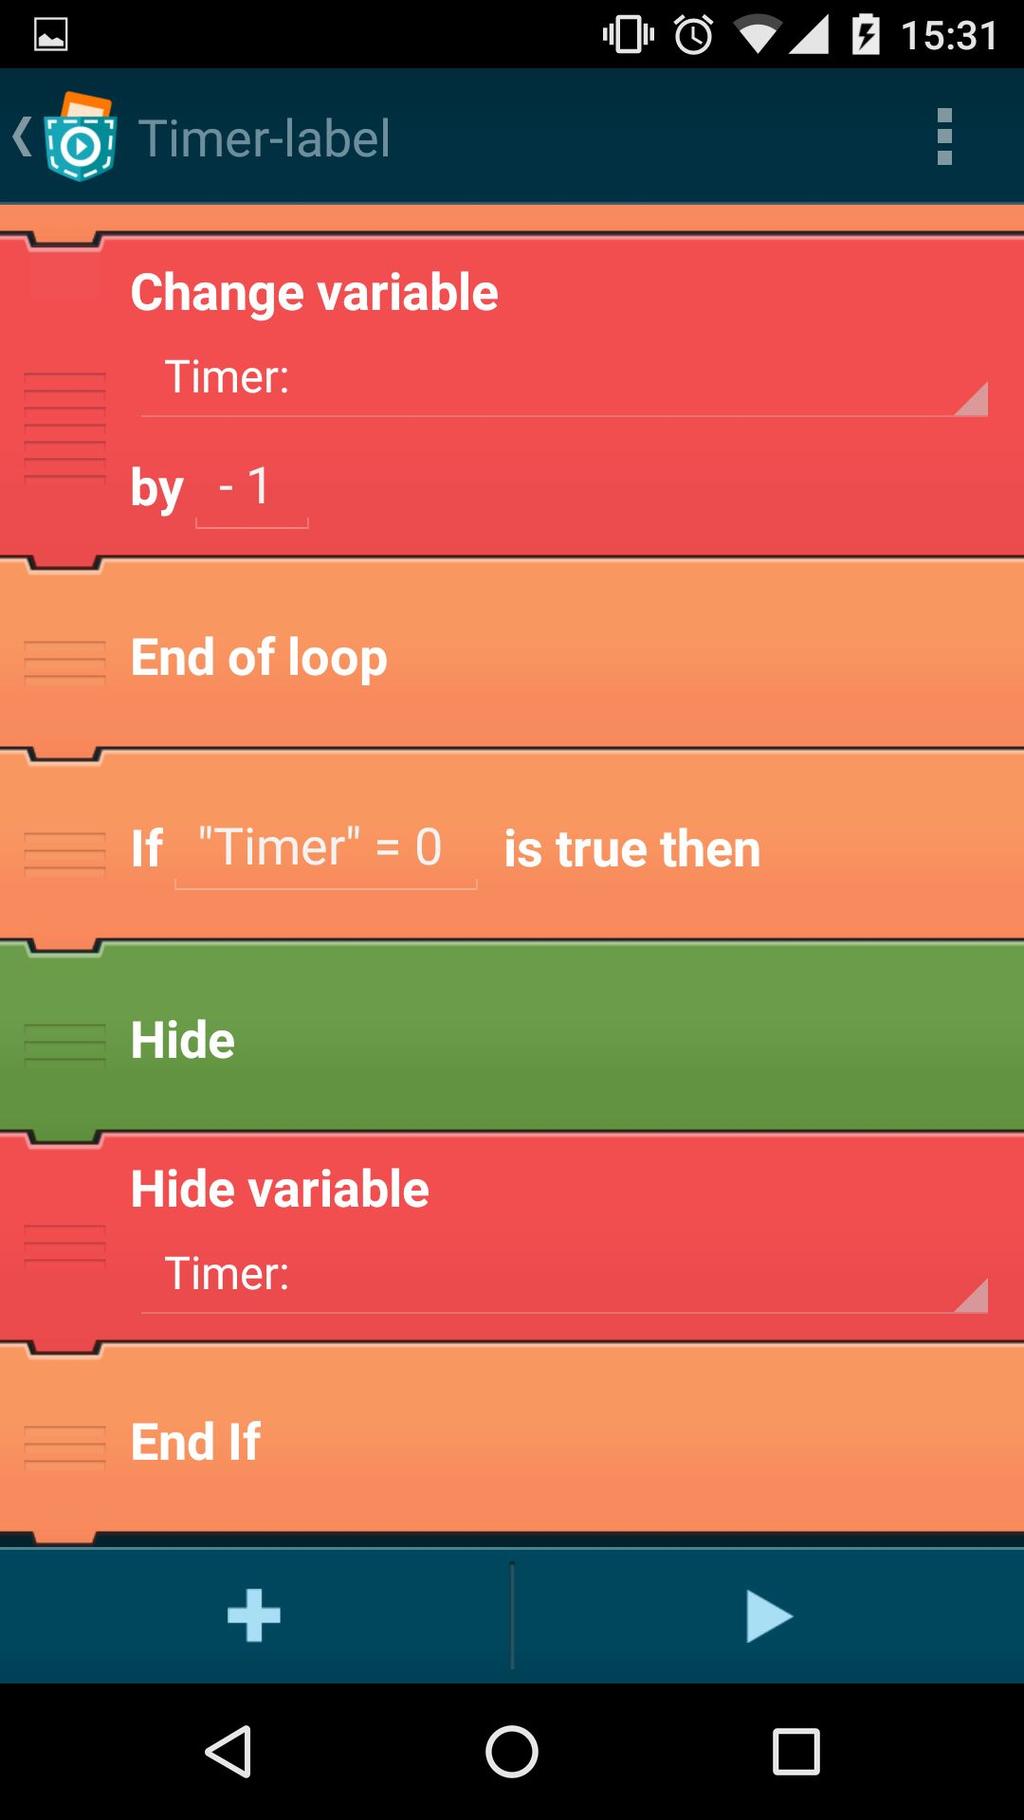 You need to create a new variable e.g., timer.